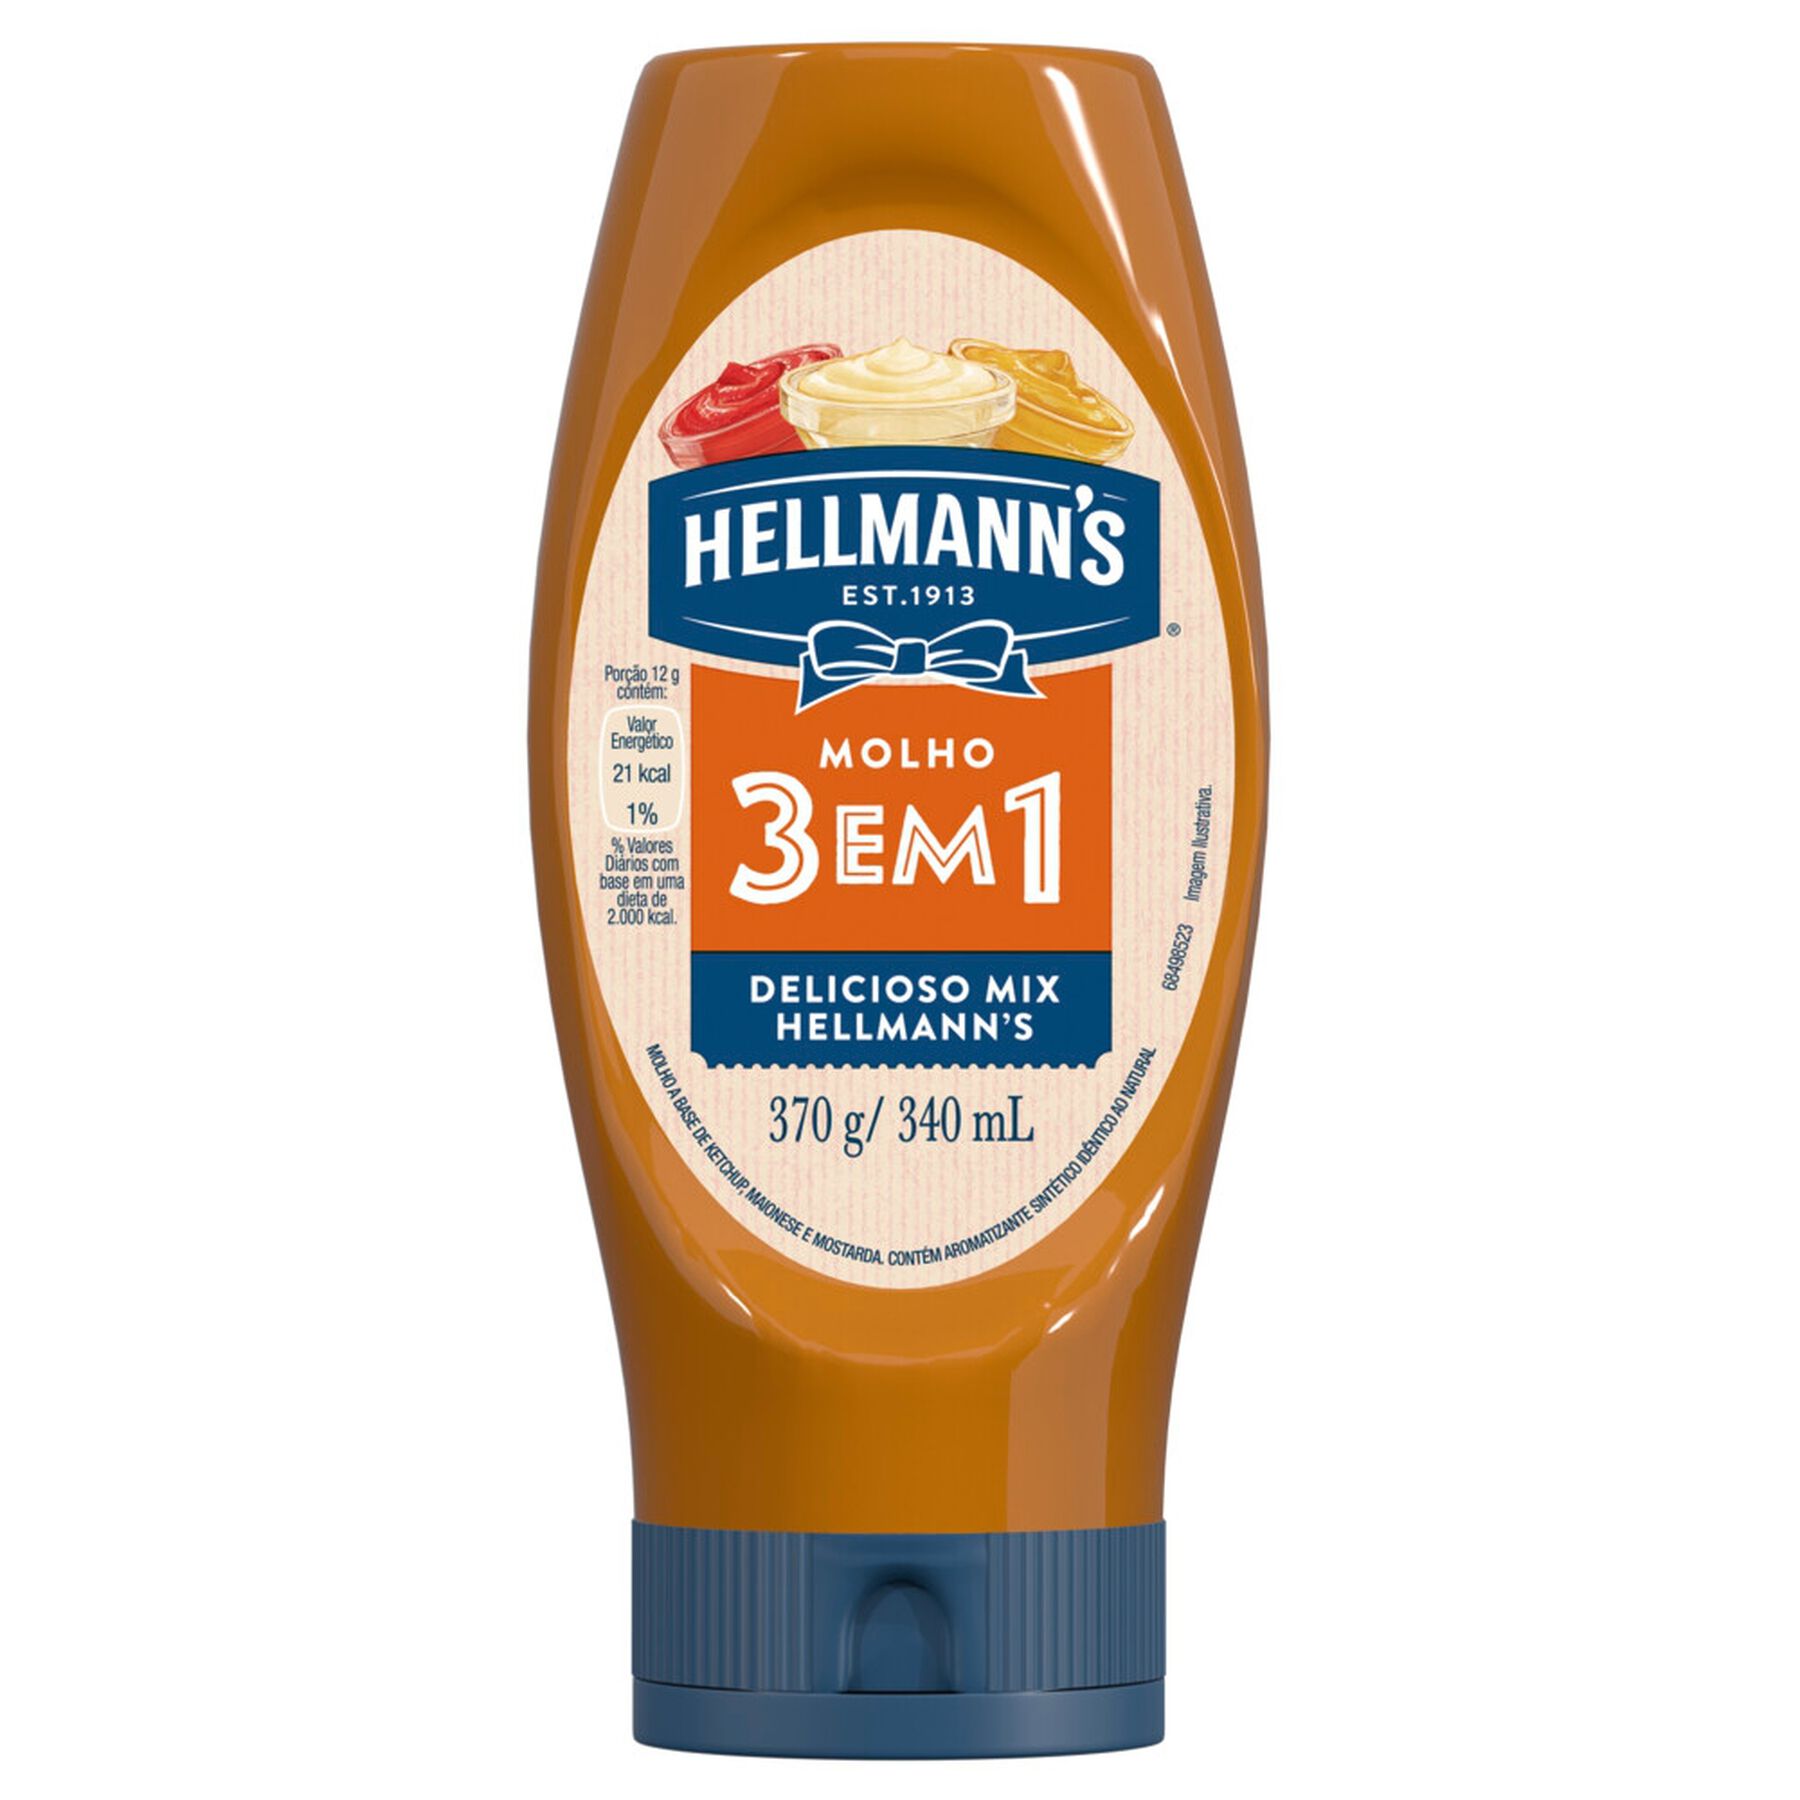 Molho 3 em 1 Delicioso Mix Hellmann's Squeeze 370g